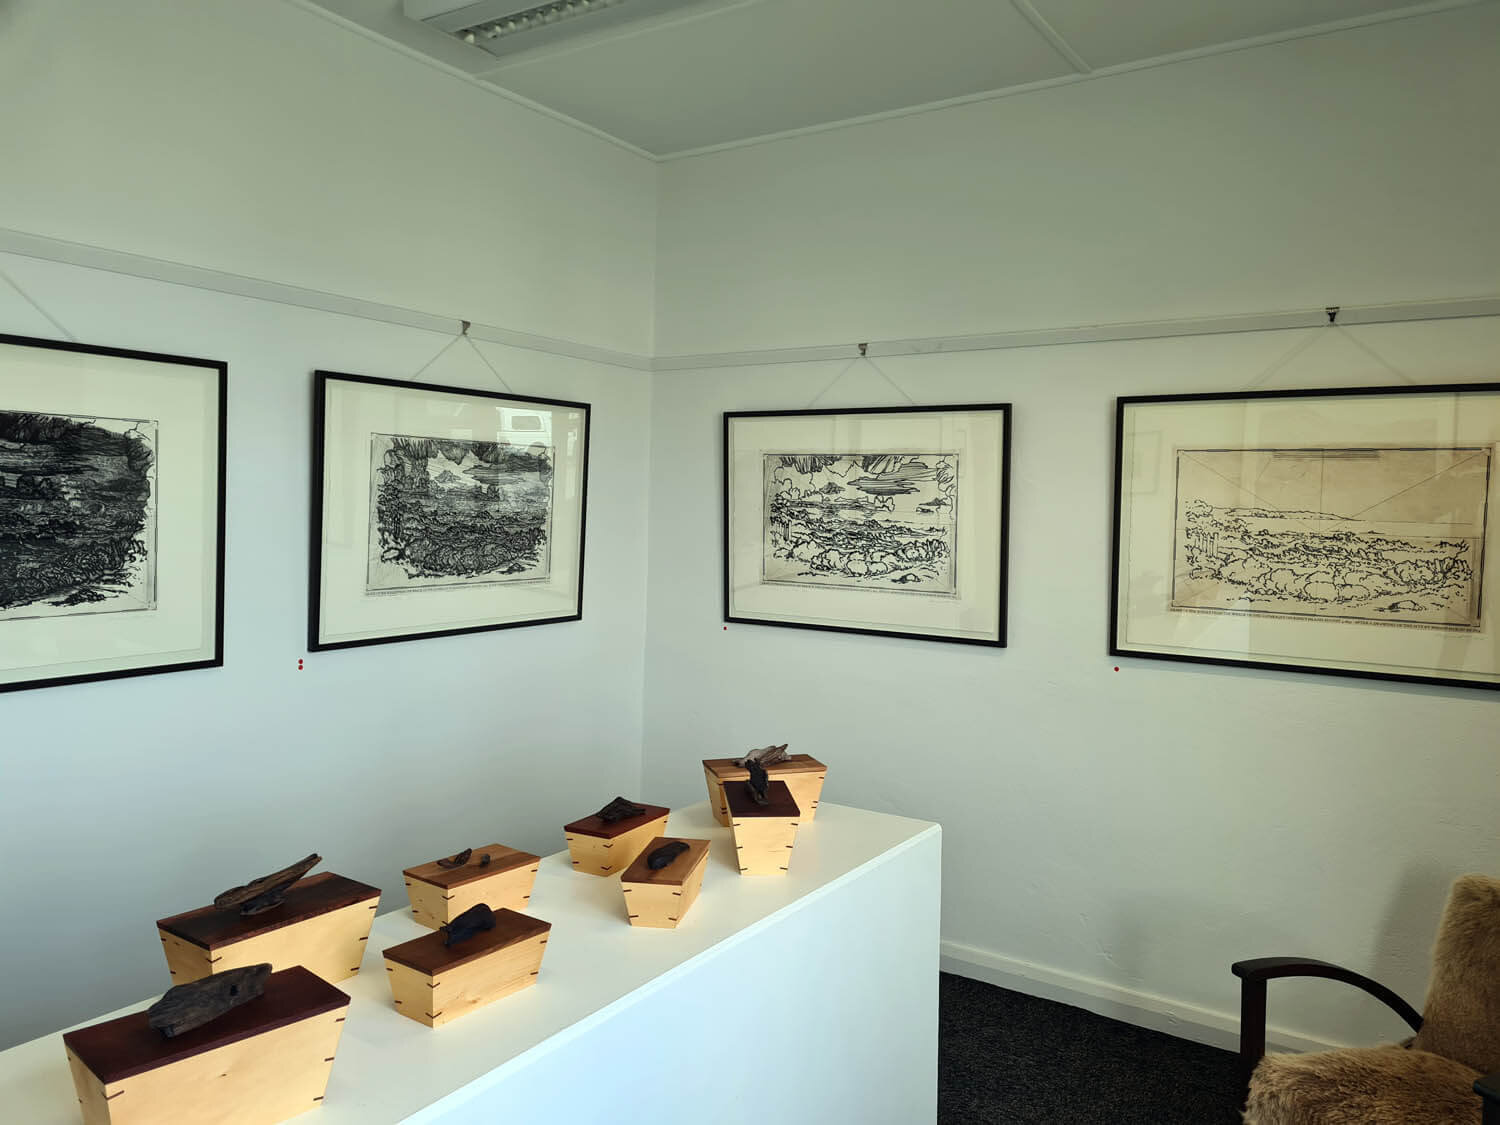   Nine Vessels for Precious Cargo  by  Roger Banfield and Alison Milsom, and etchings by Raymond Arnold 